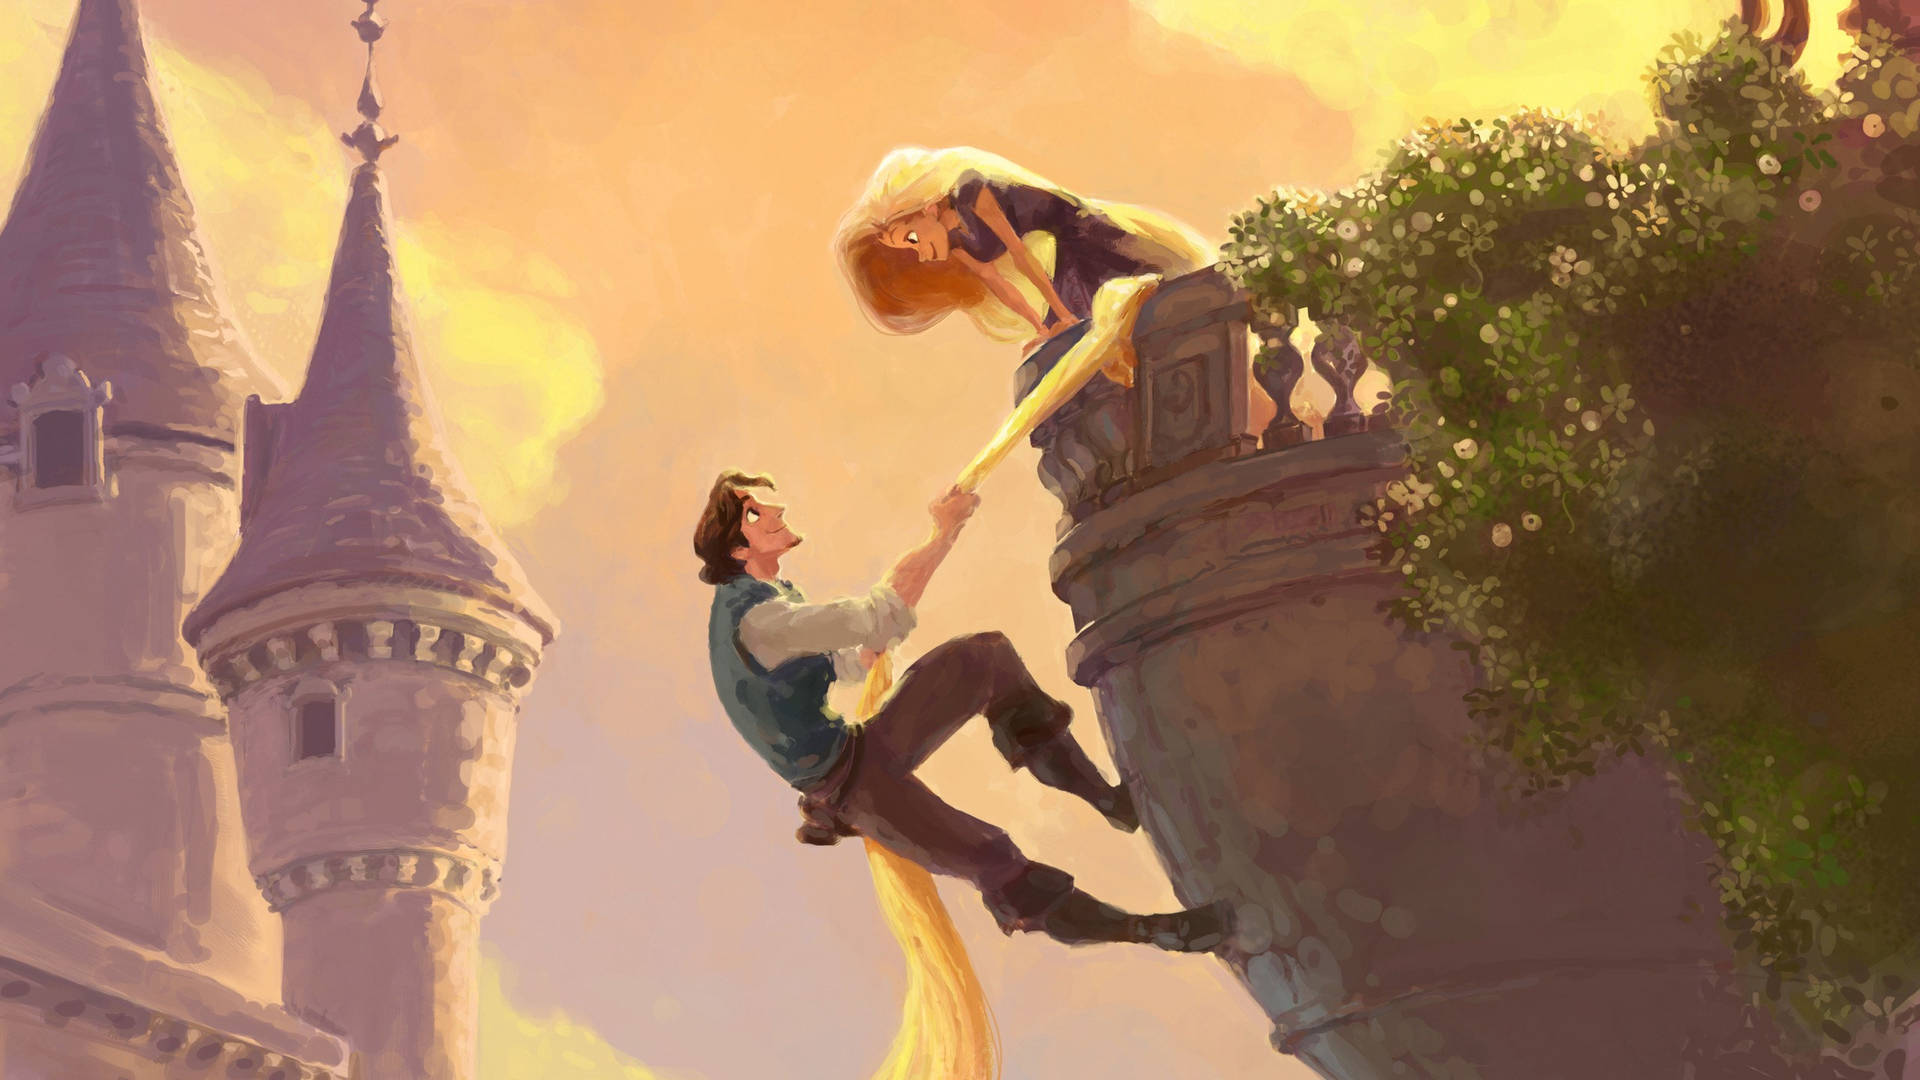 2560X1440 Tangled Wallpaper and Background